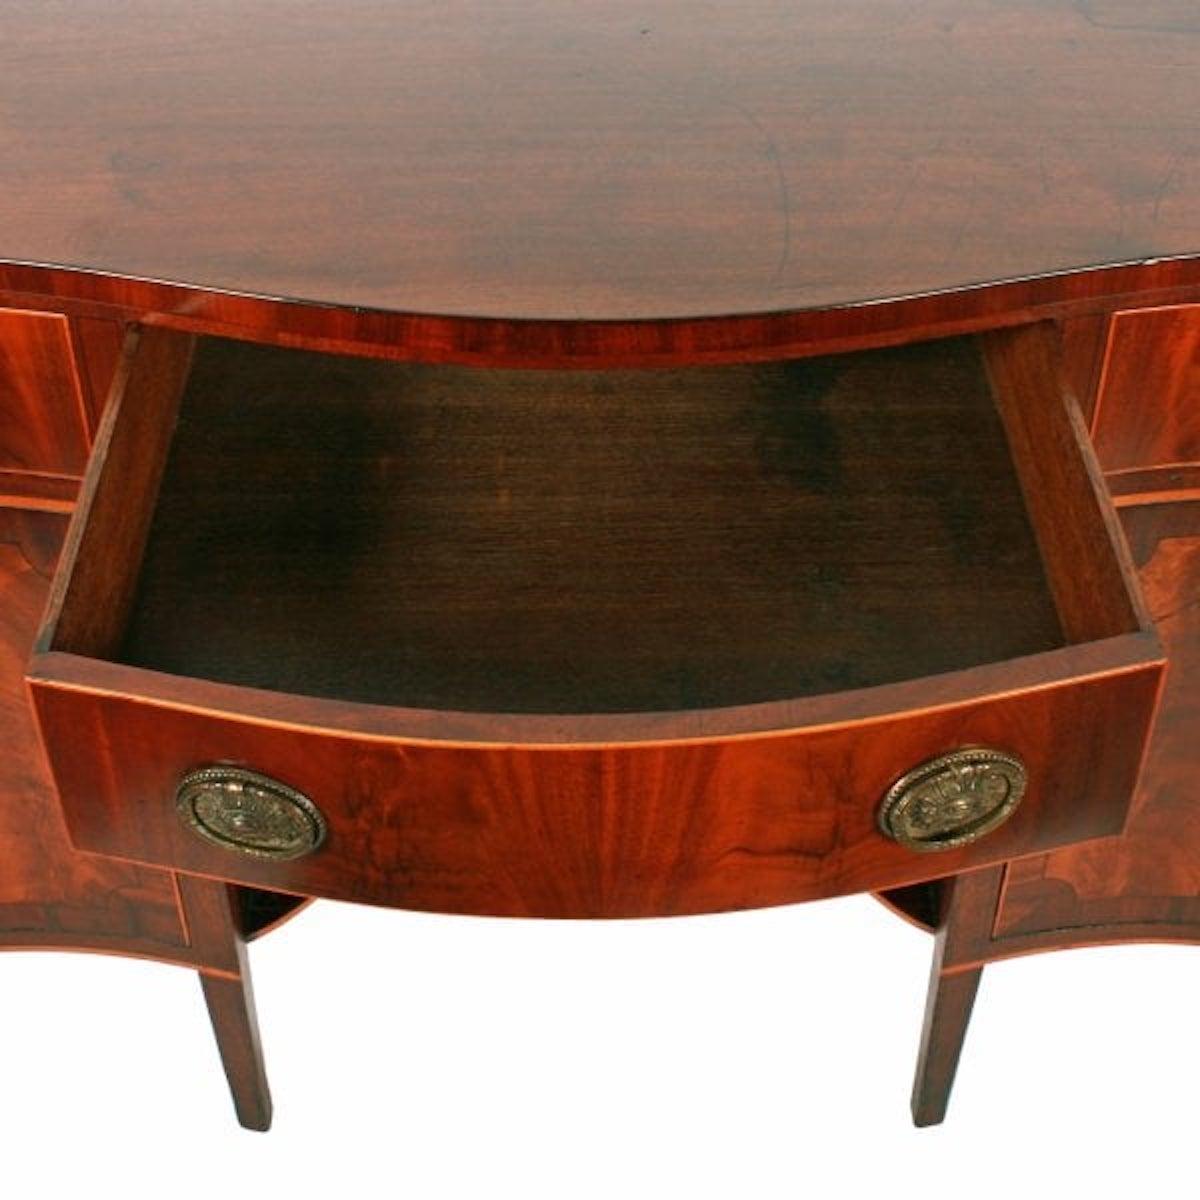 Hepplewhite Serpentine Kneehole Table, 18th Century In Excellent Condition For Sale In Southall, GB